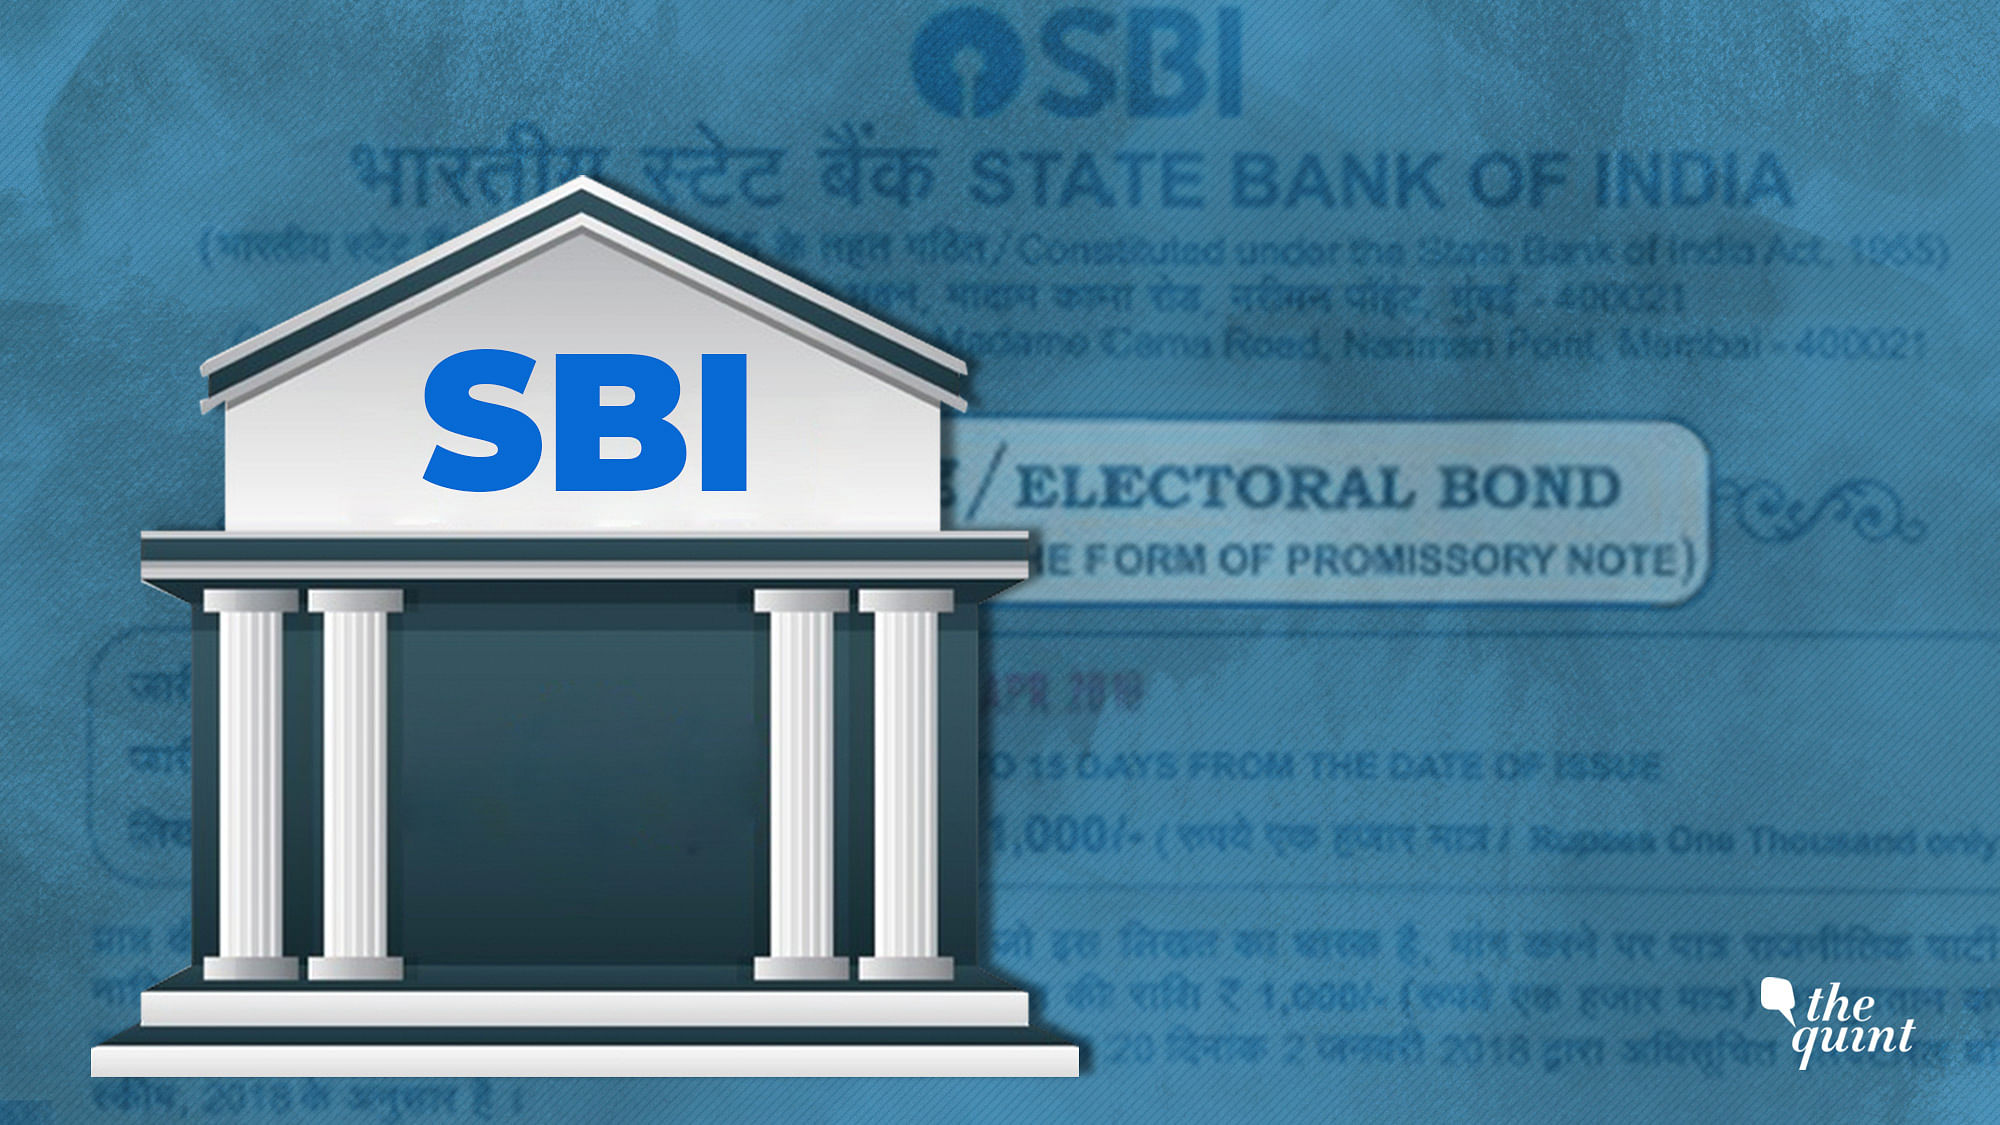 The Quint’s investigation further suggests the State Bank of India  is in close daily contact with the Ministry of Finance on matters related to the issuing of electoral bonds.